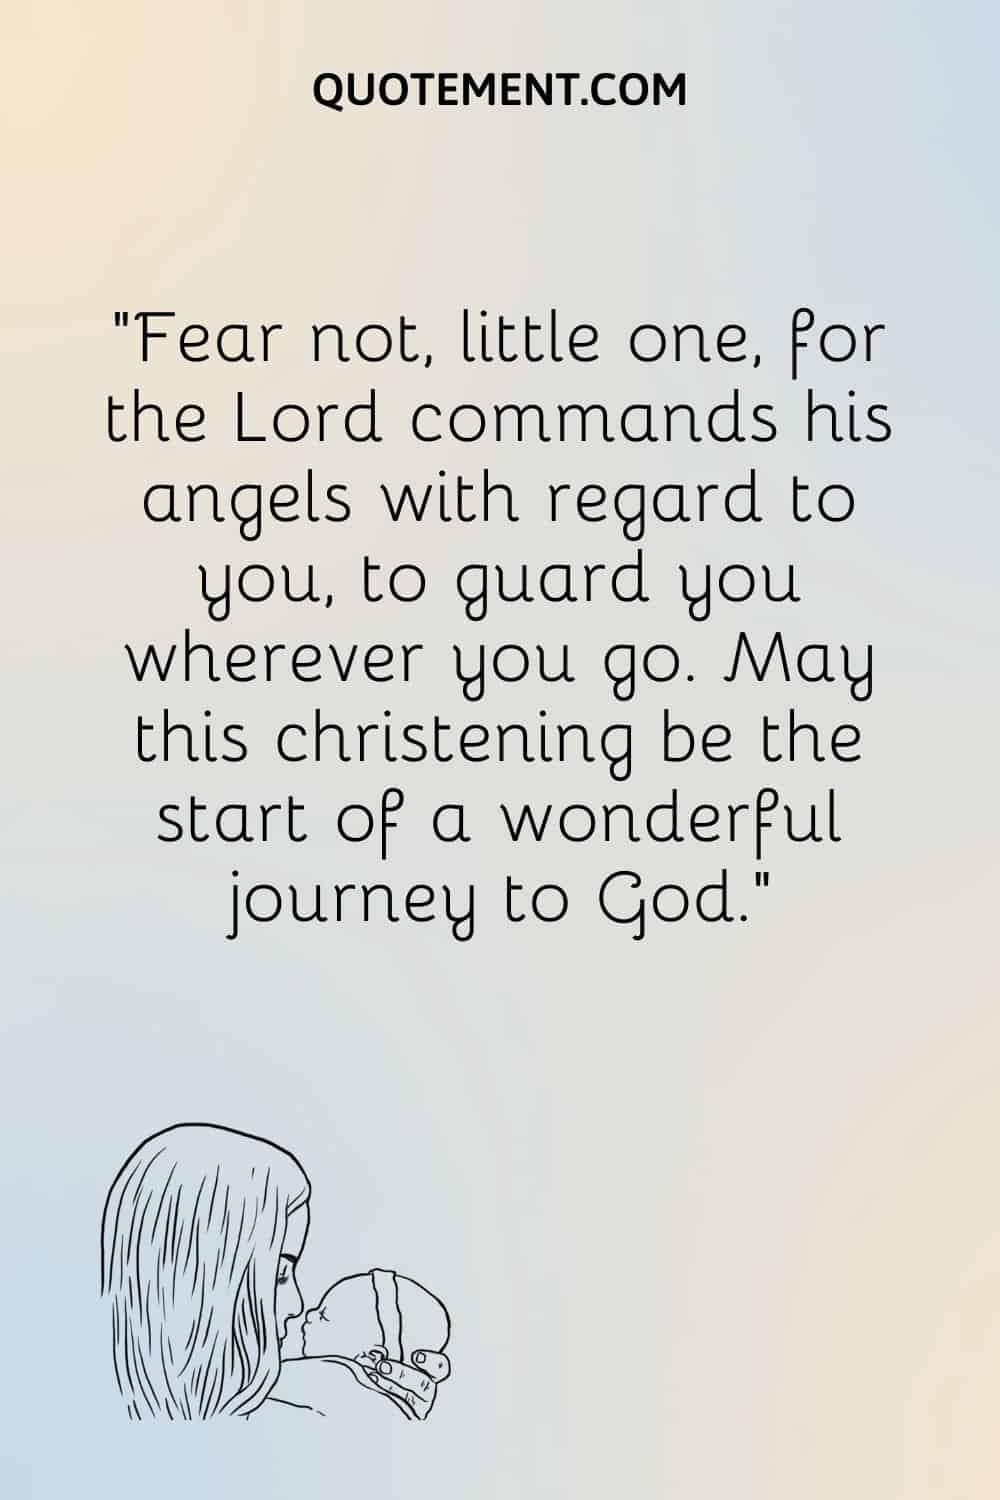 “Fear not, little one, for the Lord commands his angels with regard to you, to guard you wherever you go. May this christening be the start of a wonderful journey to God.”